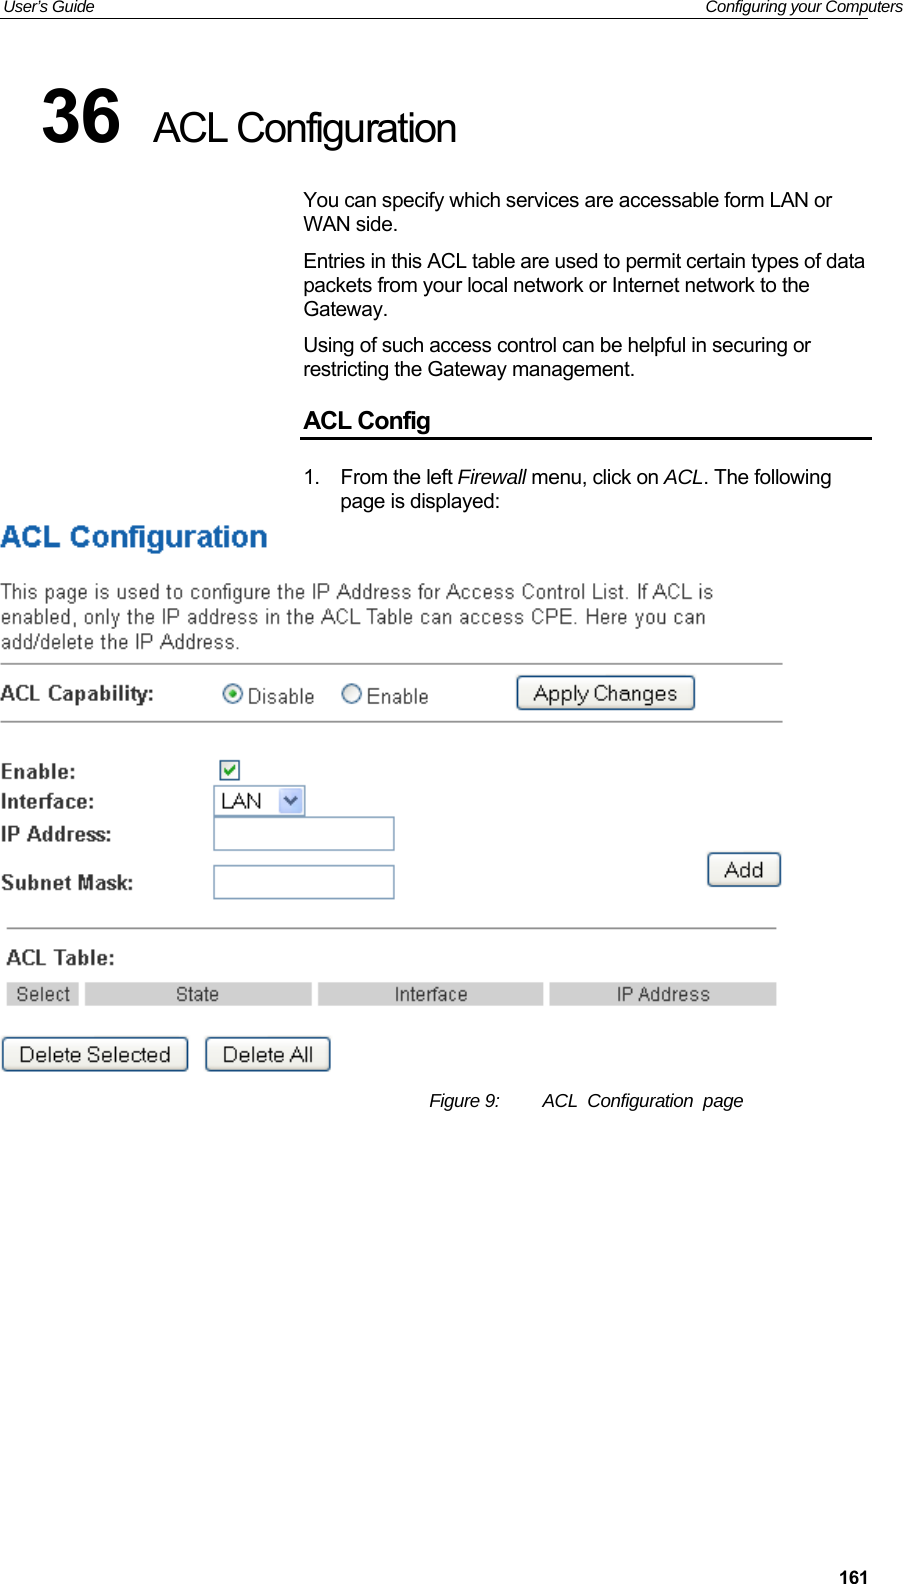 User’s Guide   Configuring your Computers  16136  ACL Configuration You can specify which services are accessable form LAN or WAN side. Entries in this ACL table are used to permit certain types of data packets from your local network or Internet network to the Gateway. Using of such access control can be helpful in securing or restricting the Gateway management. ACL Config 1.  From the left Firewall menu, click on ACL. The following page is displayed:  Figure 9:  ACL  Configuration  page          